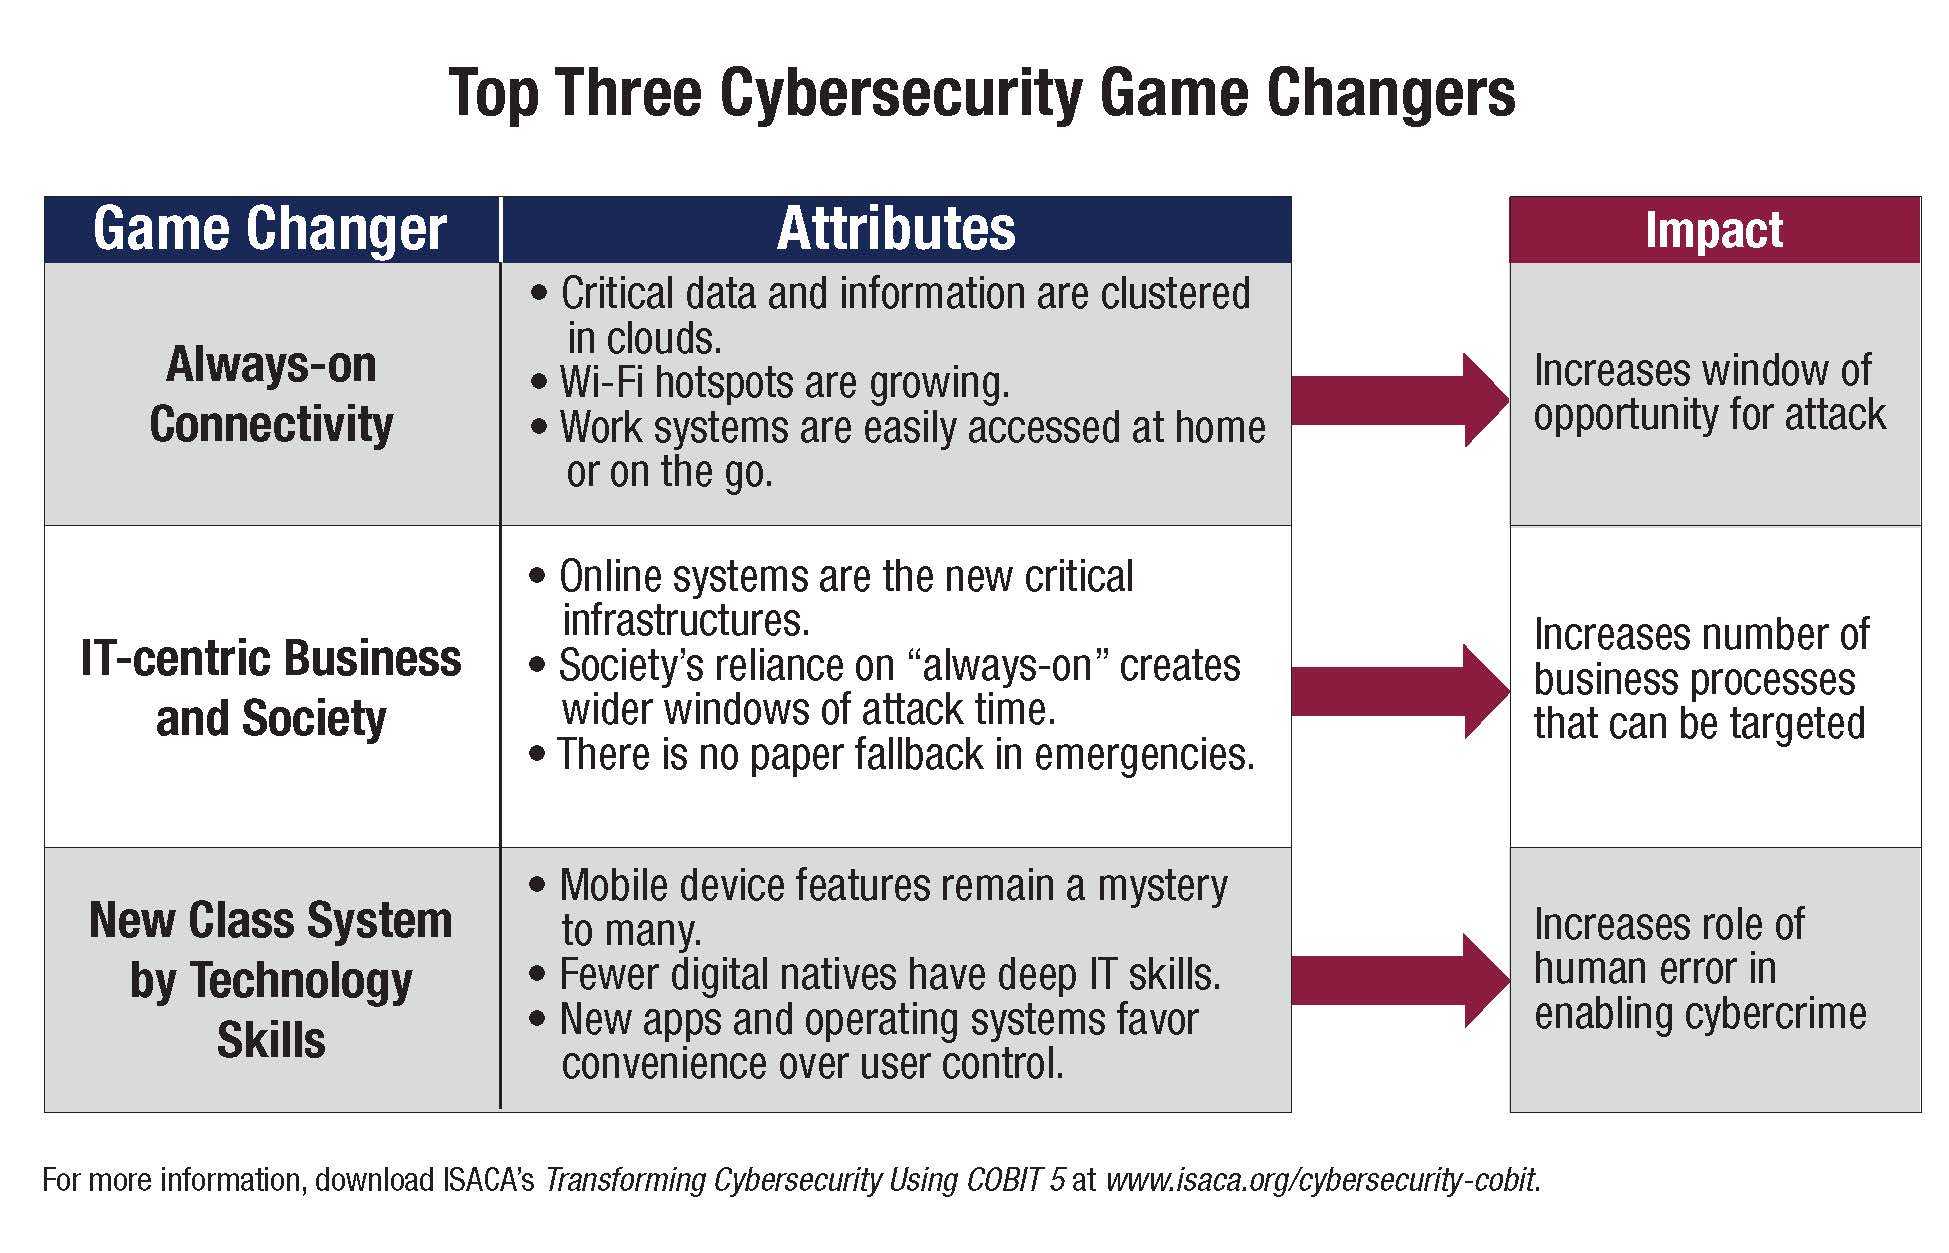 Cyber Security Org Chart